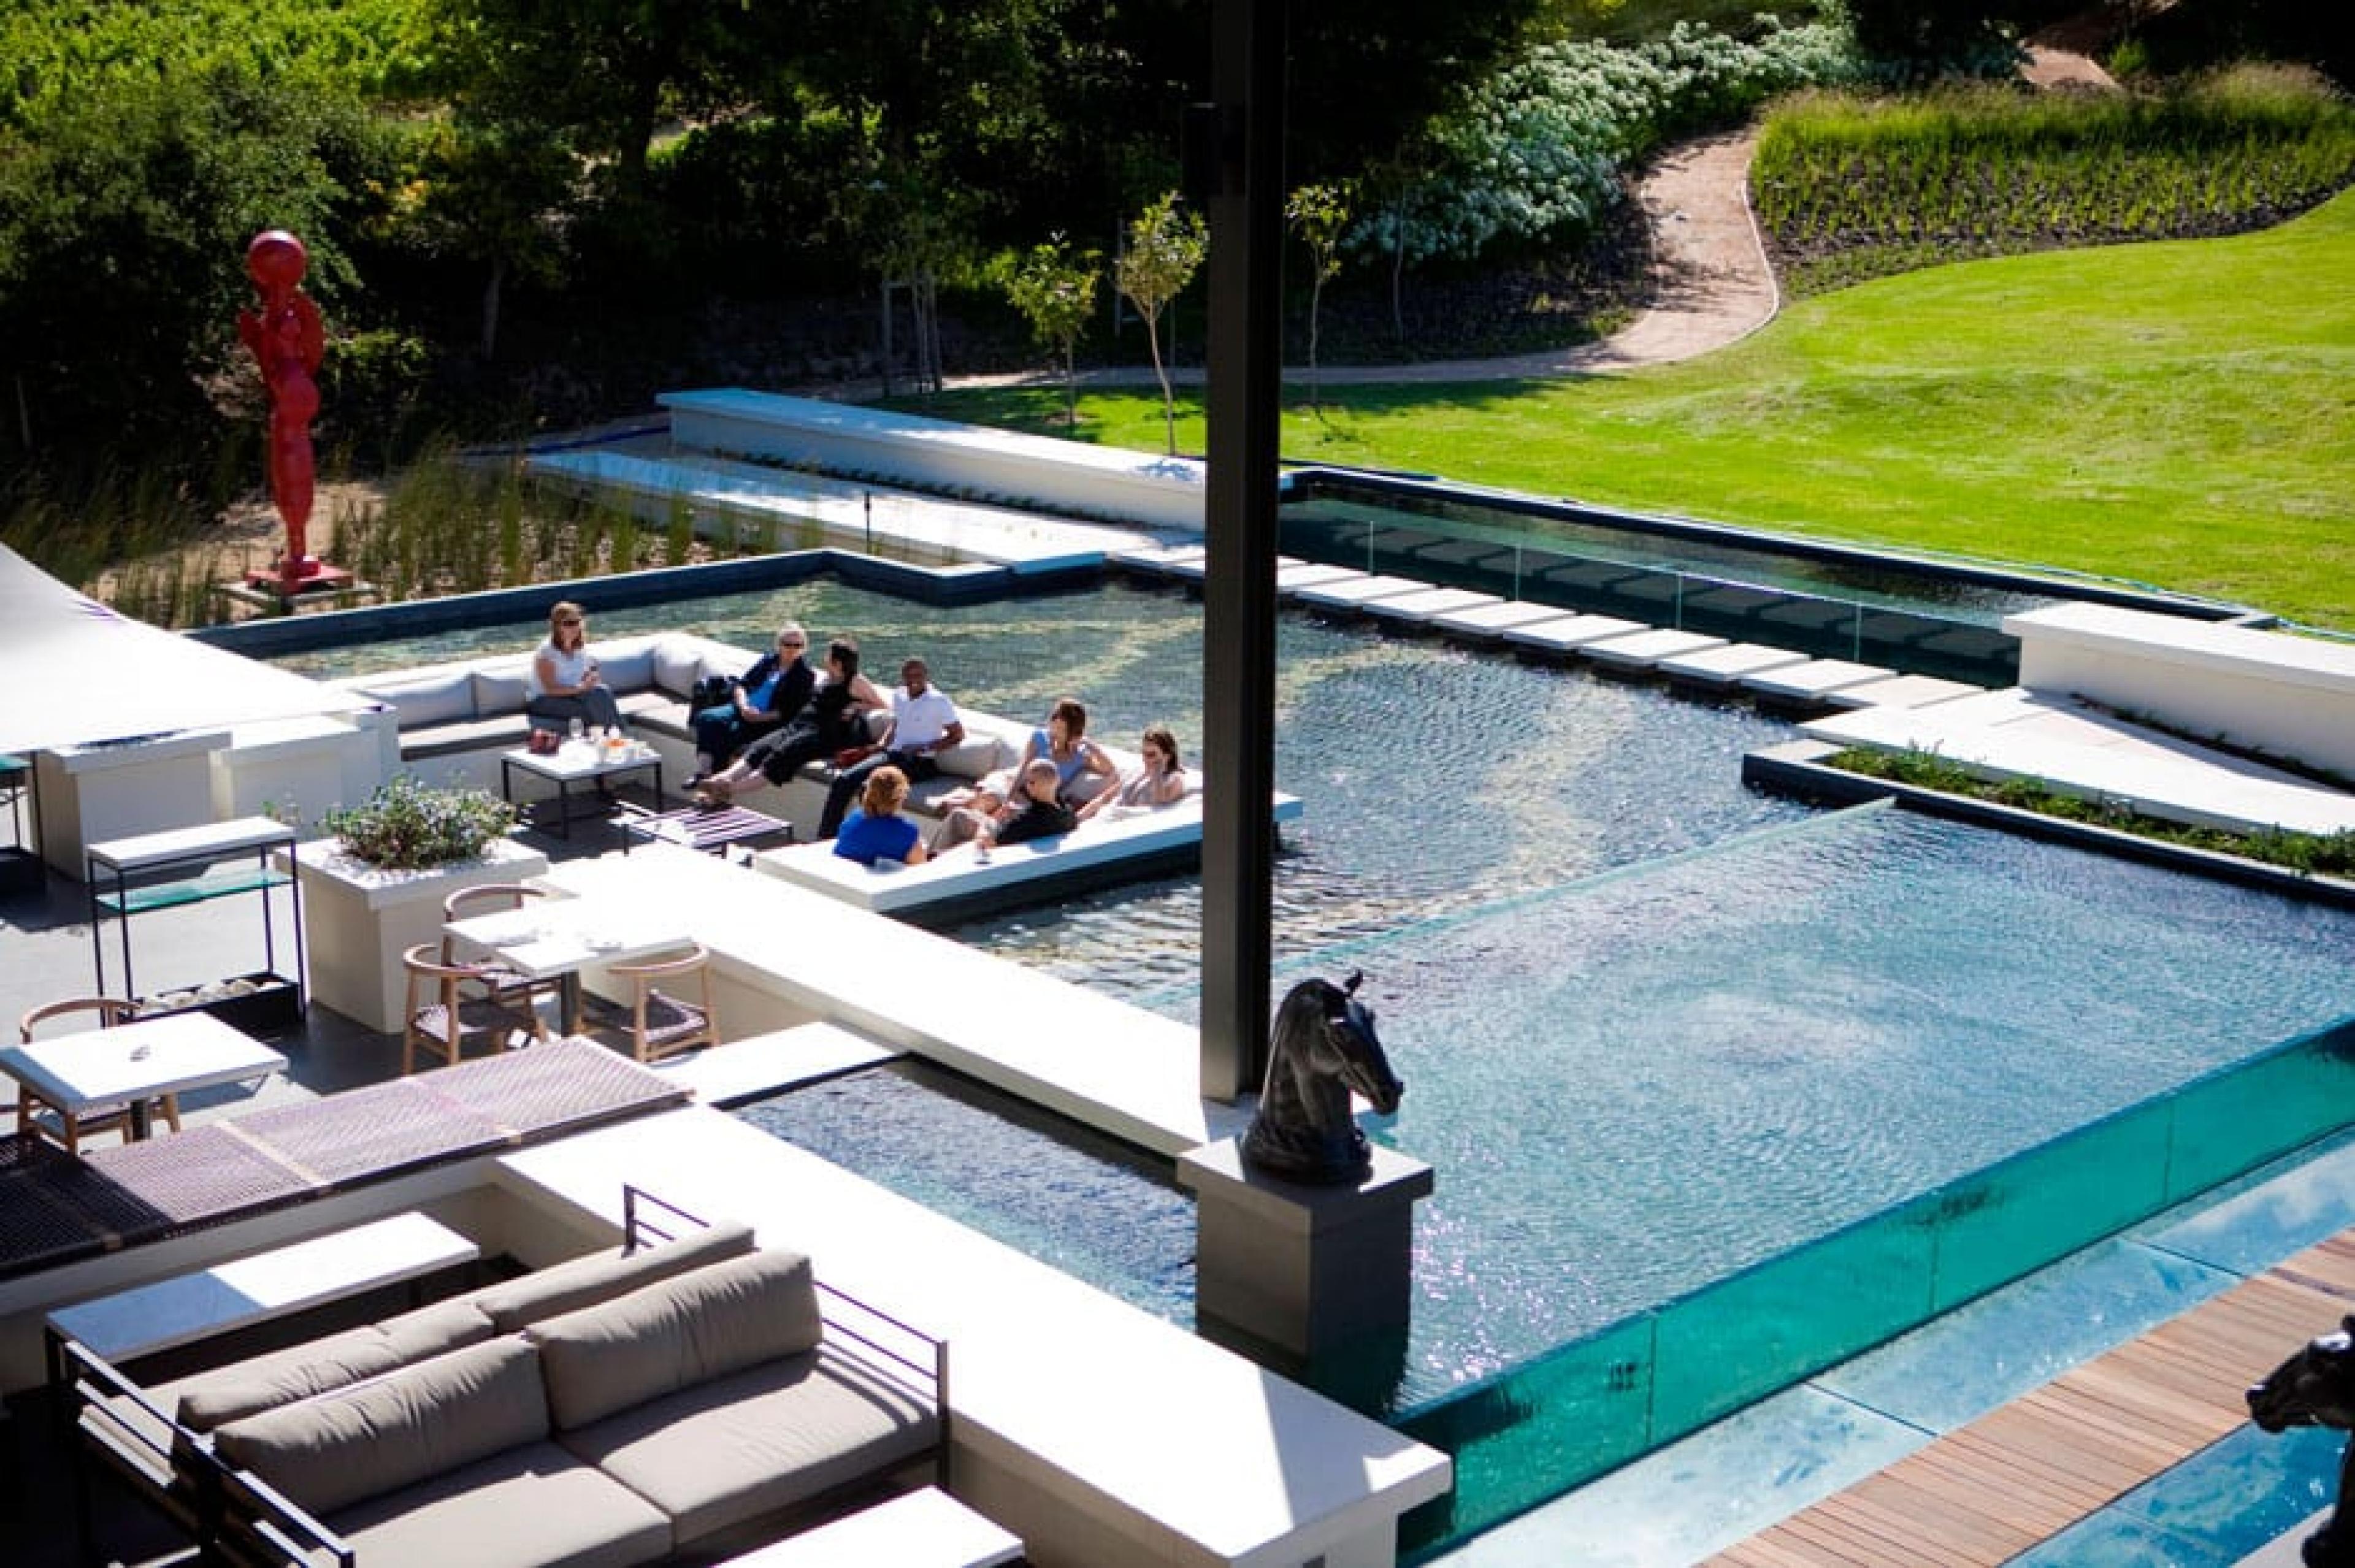 Pool at Bistro Sixteen 82, Cape Town, South Africa